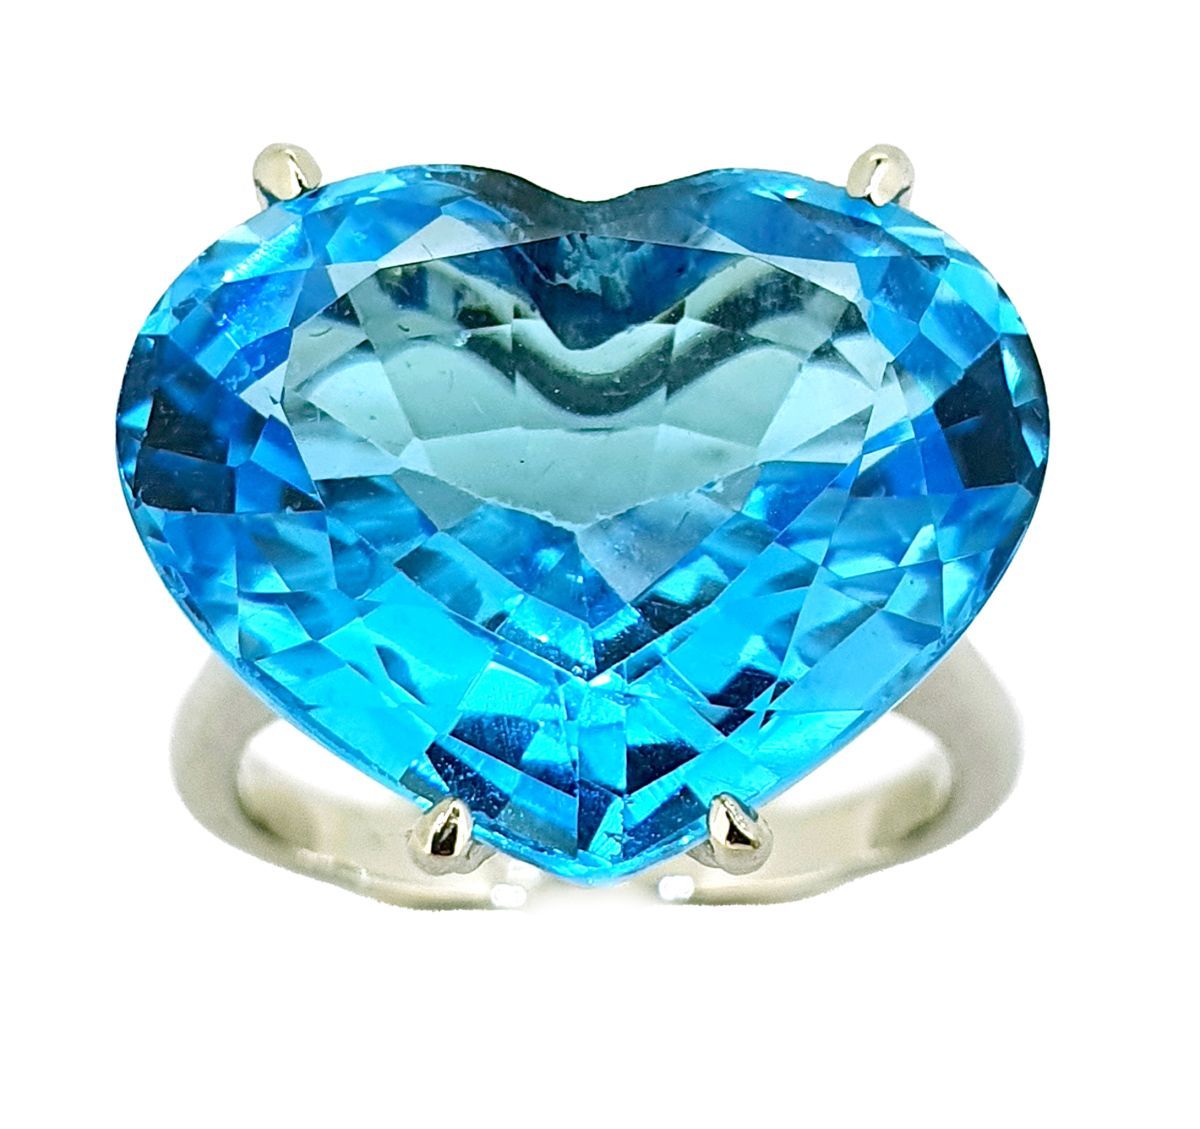 BAGUE TOPAZE An 18k white gold ring set with a heart shaped blue topaz.